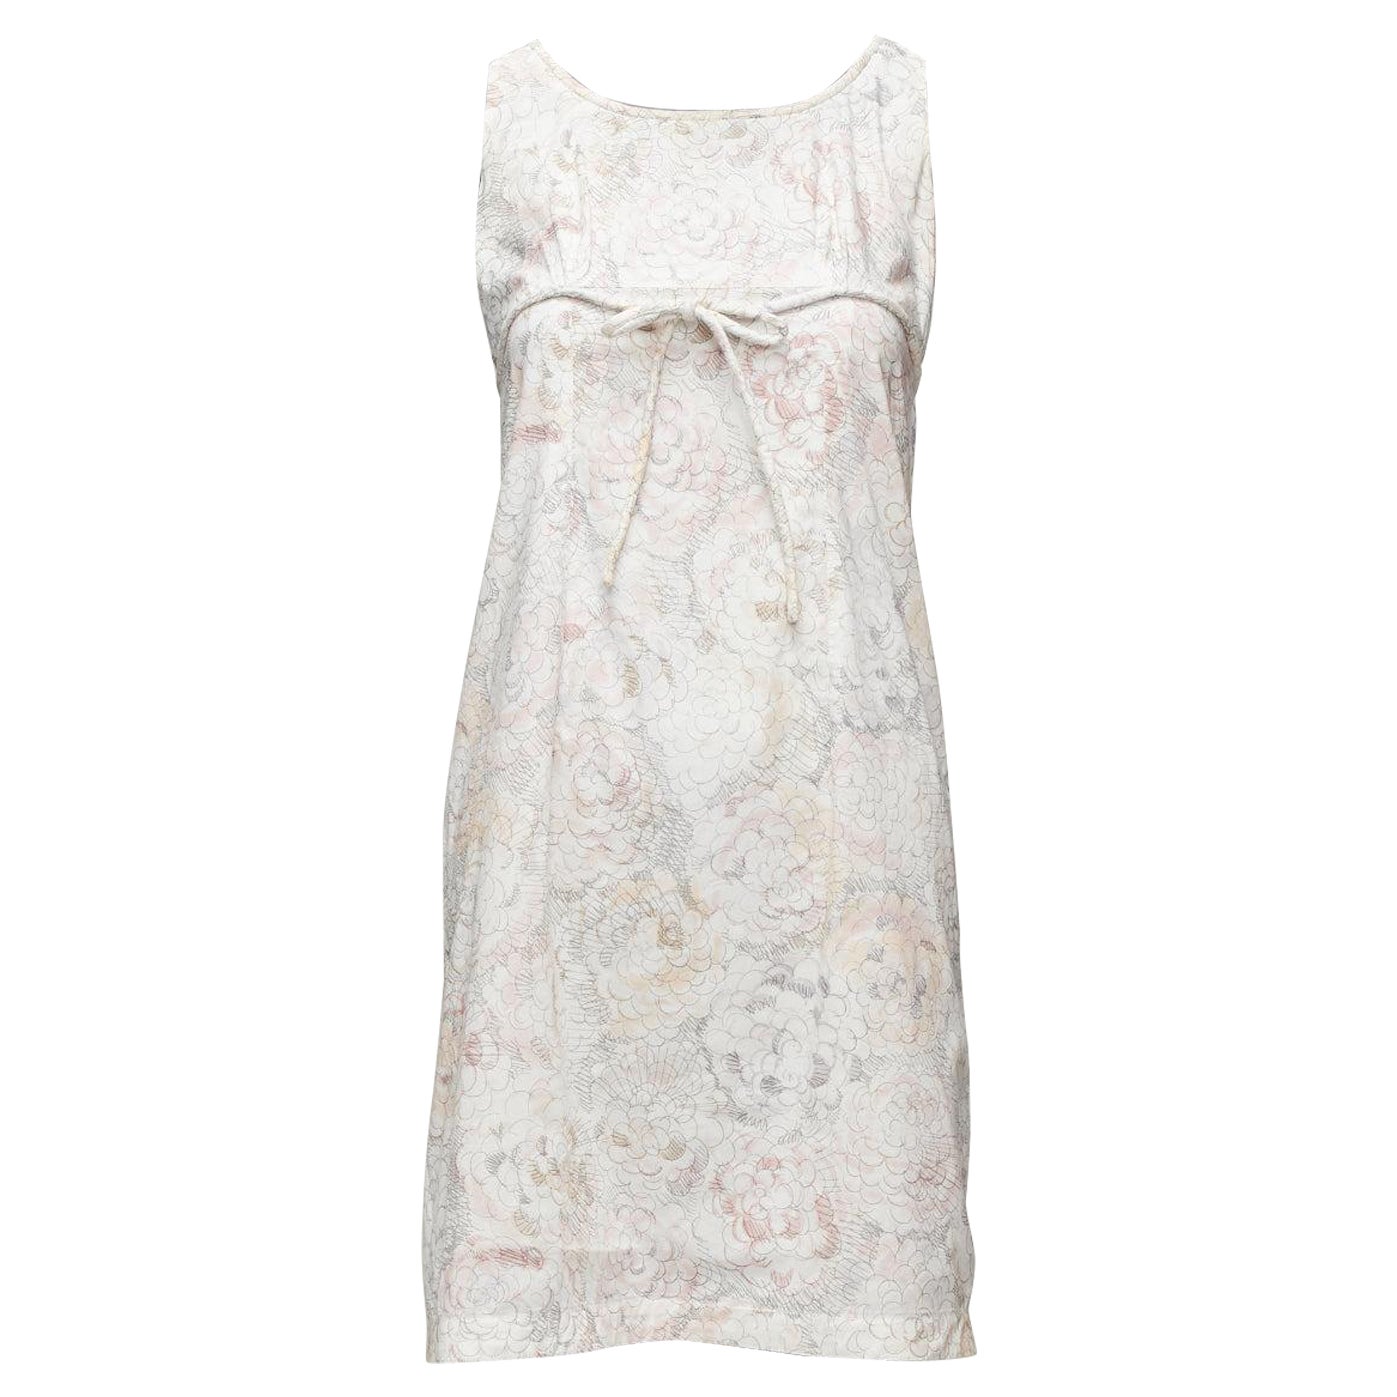 CHANEL white pink floral camellia print front bow tie mod mini dress FR34 XS For Sale